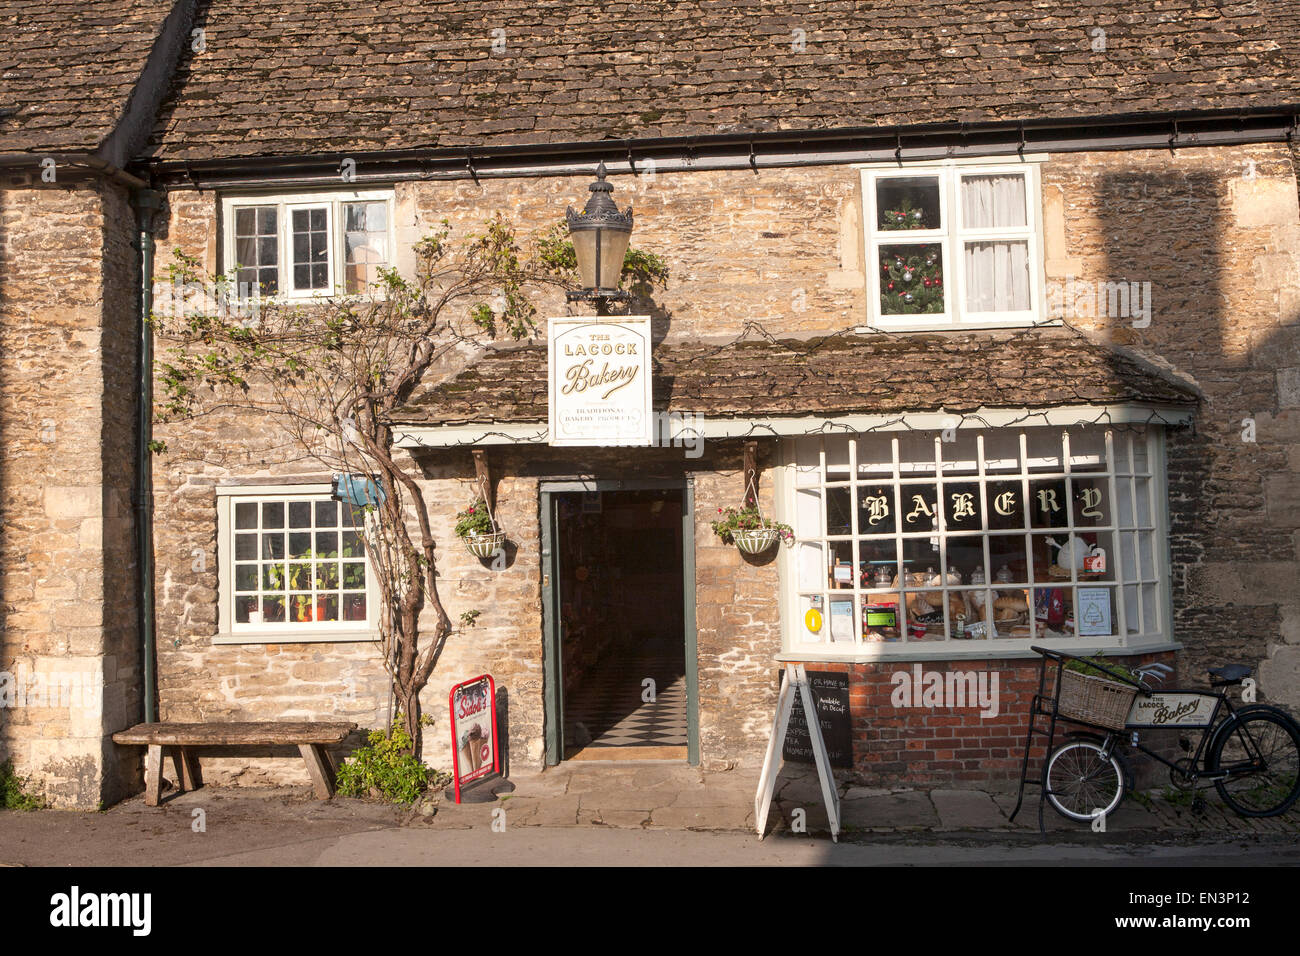 Traditional old fashioned exterior of village bakery shop at Lacock, Wiltshire, England, UK Stock Photo